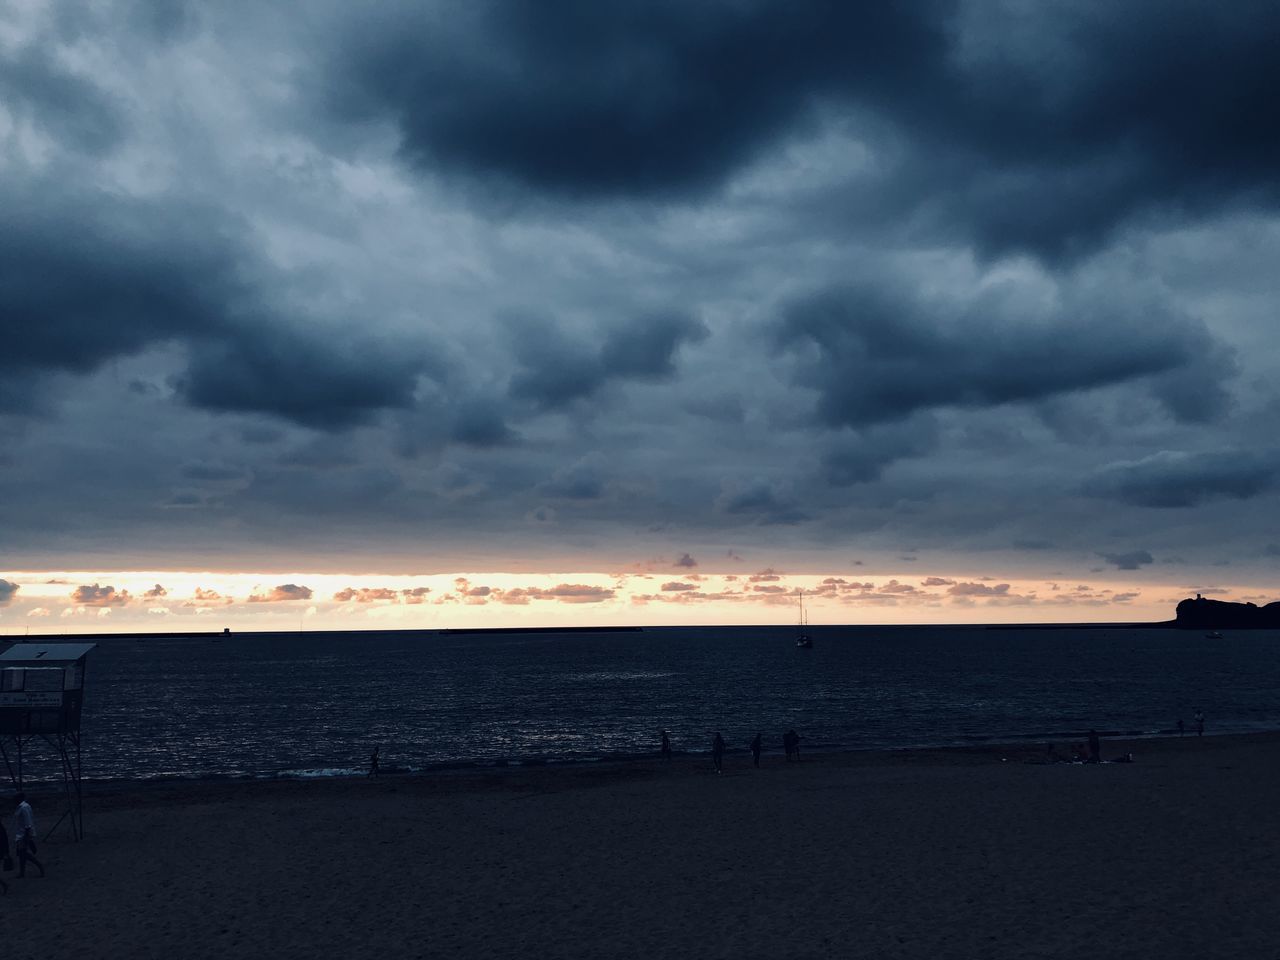 cloud - sky, sky, sea, water, beauty in nature, sunset, scenics - nature, land, beach, horizon, tranquility, tranquil scene, nature, horizon over water, storm, overcast, no people, dramatic sky, outdoors, ominous